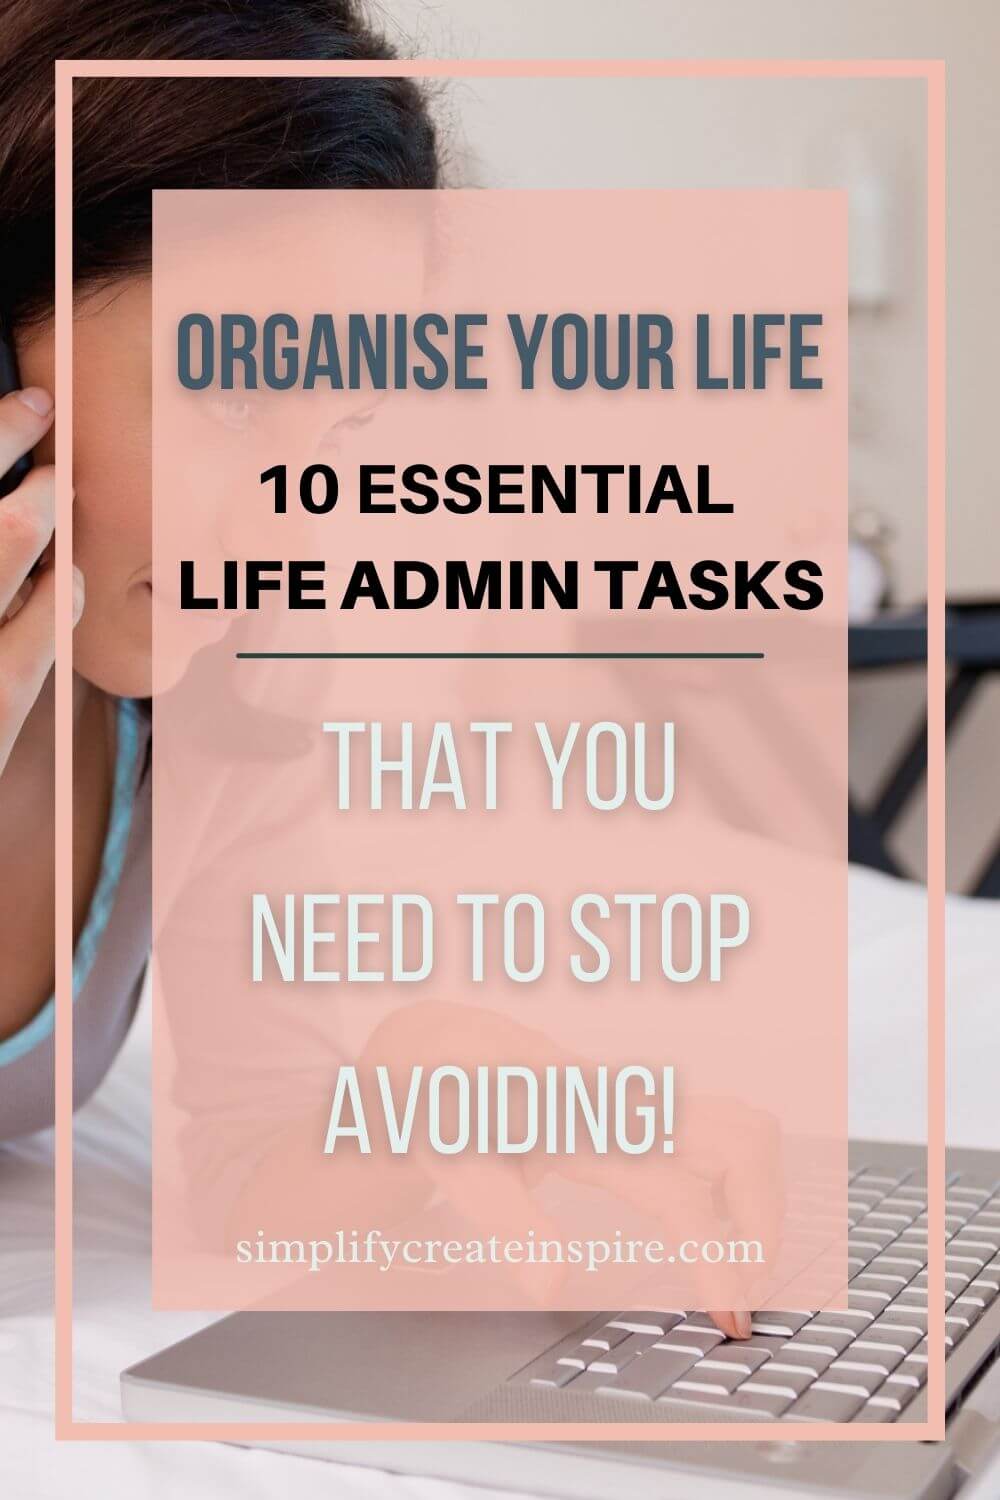 Life admin tasks to organise your life